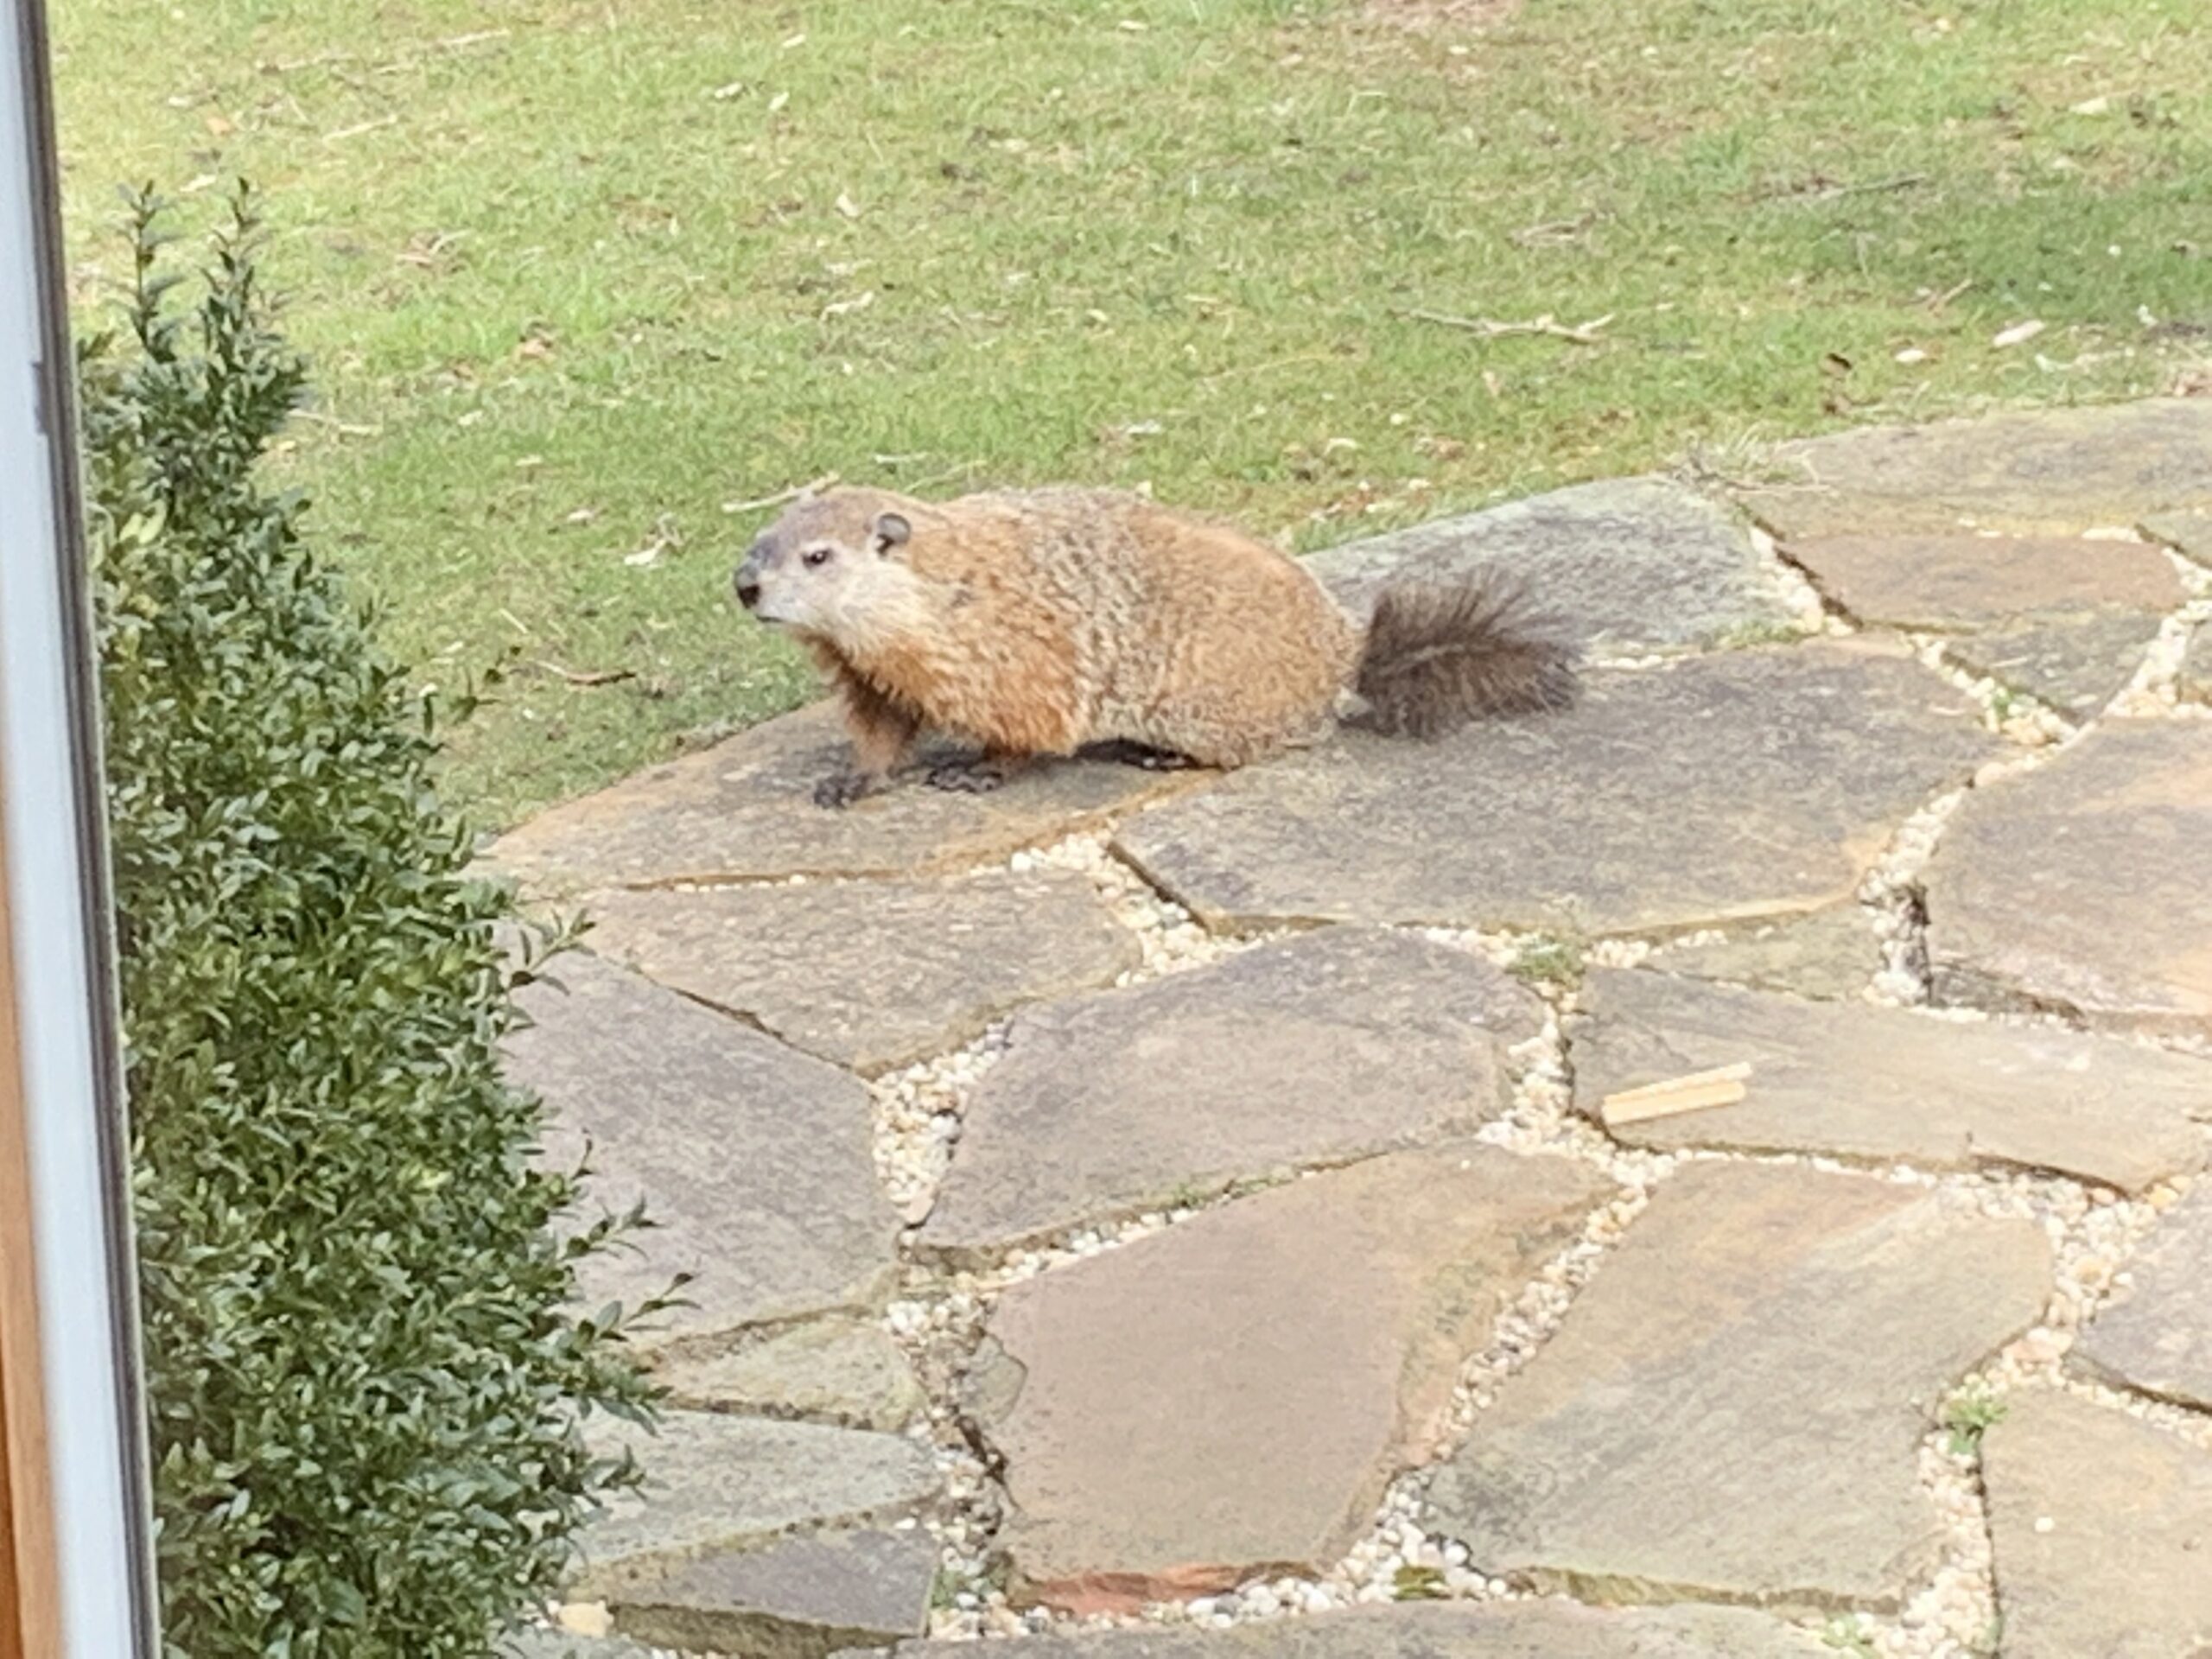 The Watermans of Hither Woods on the western edge of Montauk finally found the culprit of piles of dirt and tunnels in their yard, a groundhog, which were not thought to be as far east as Montauk as of 2016.    COURTESY CHRIS WATERMAN